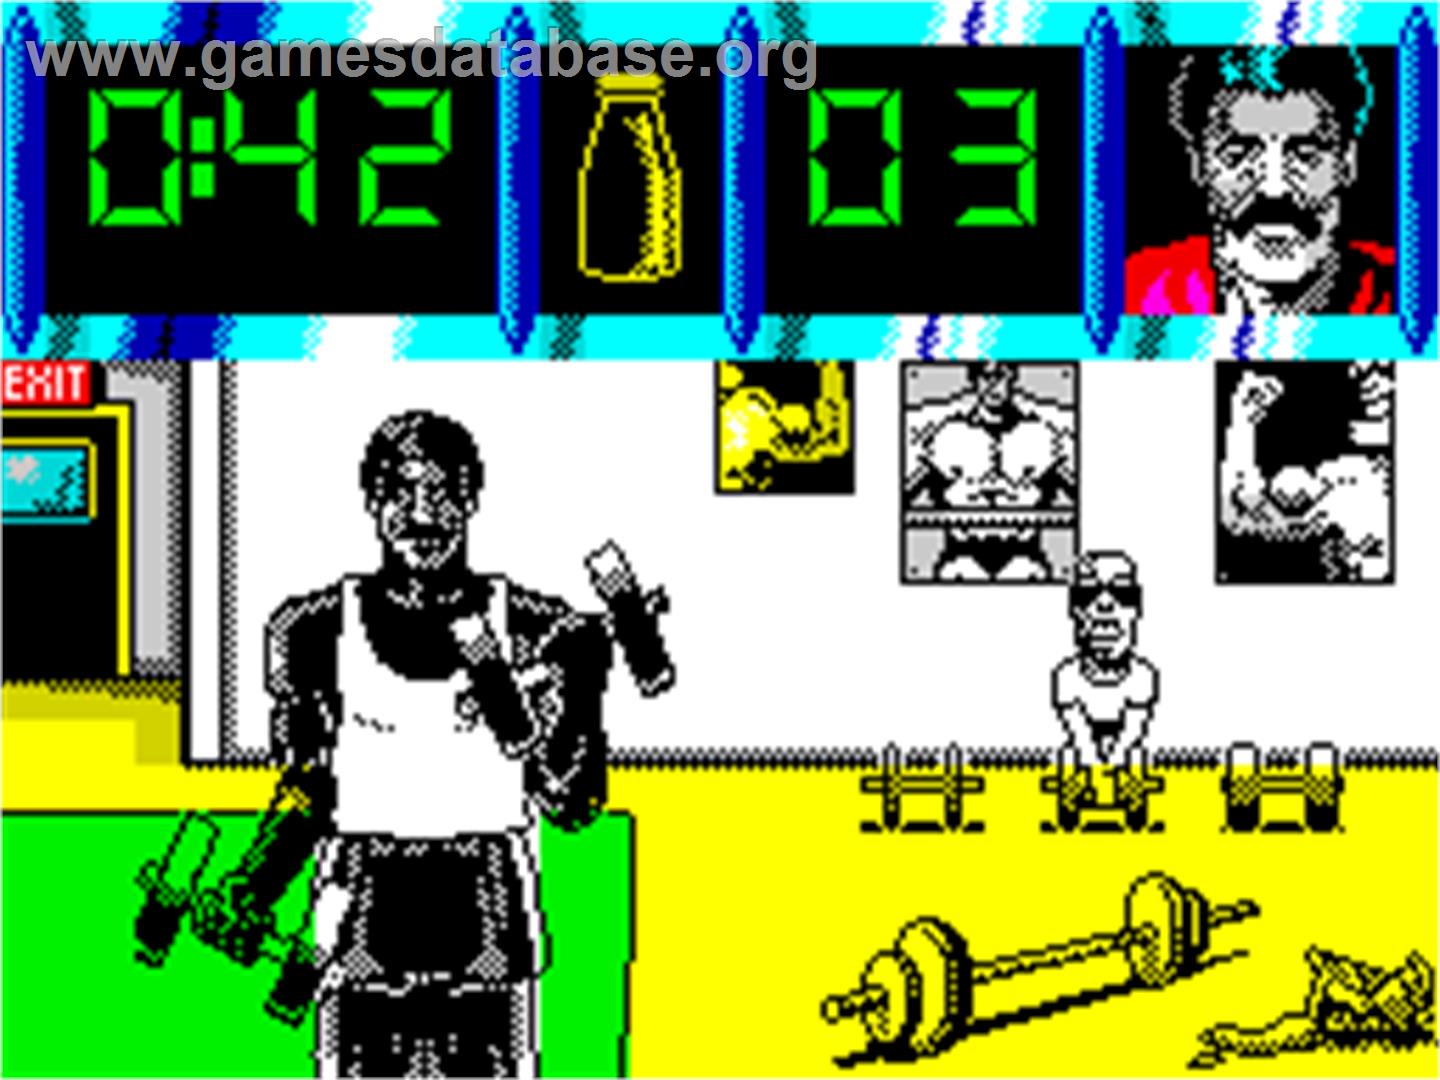 Daley Thompson's Olympic Challenge - Sinclair ZX Spectrum - Artwork - In Game